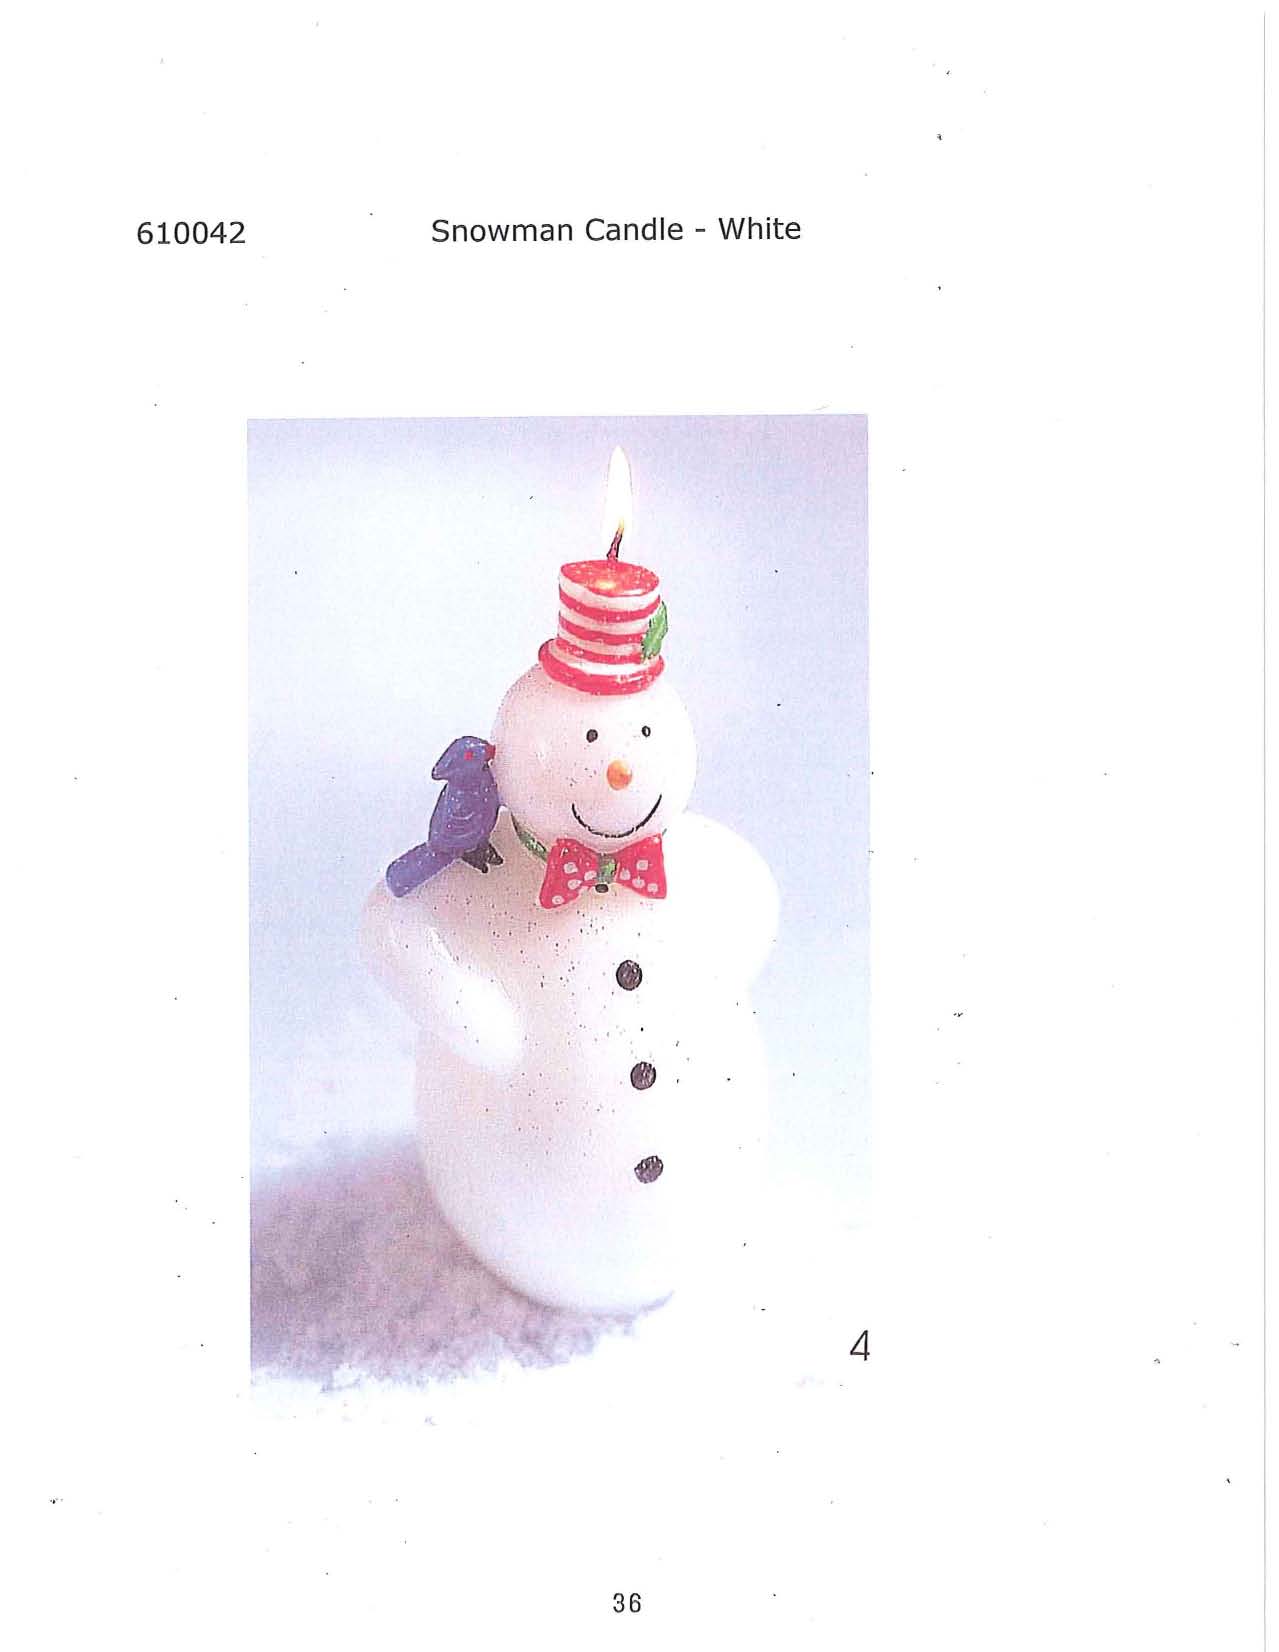 Snowman Candle - White